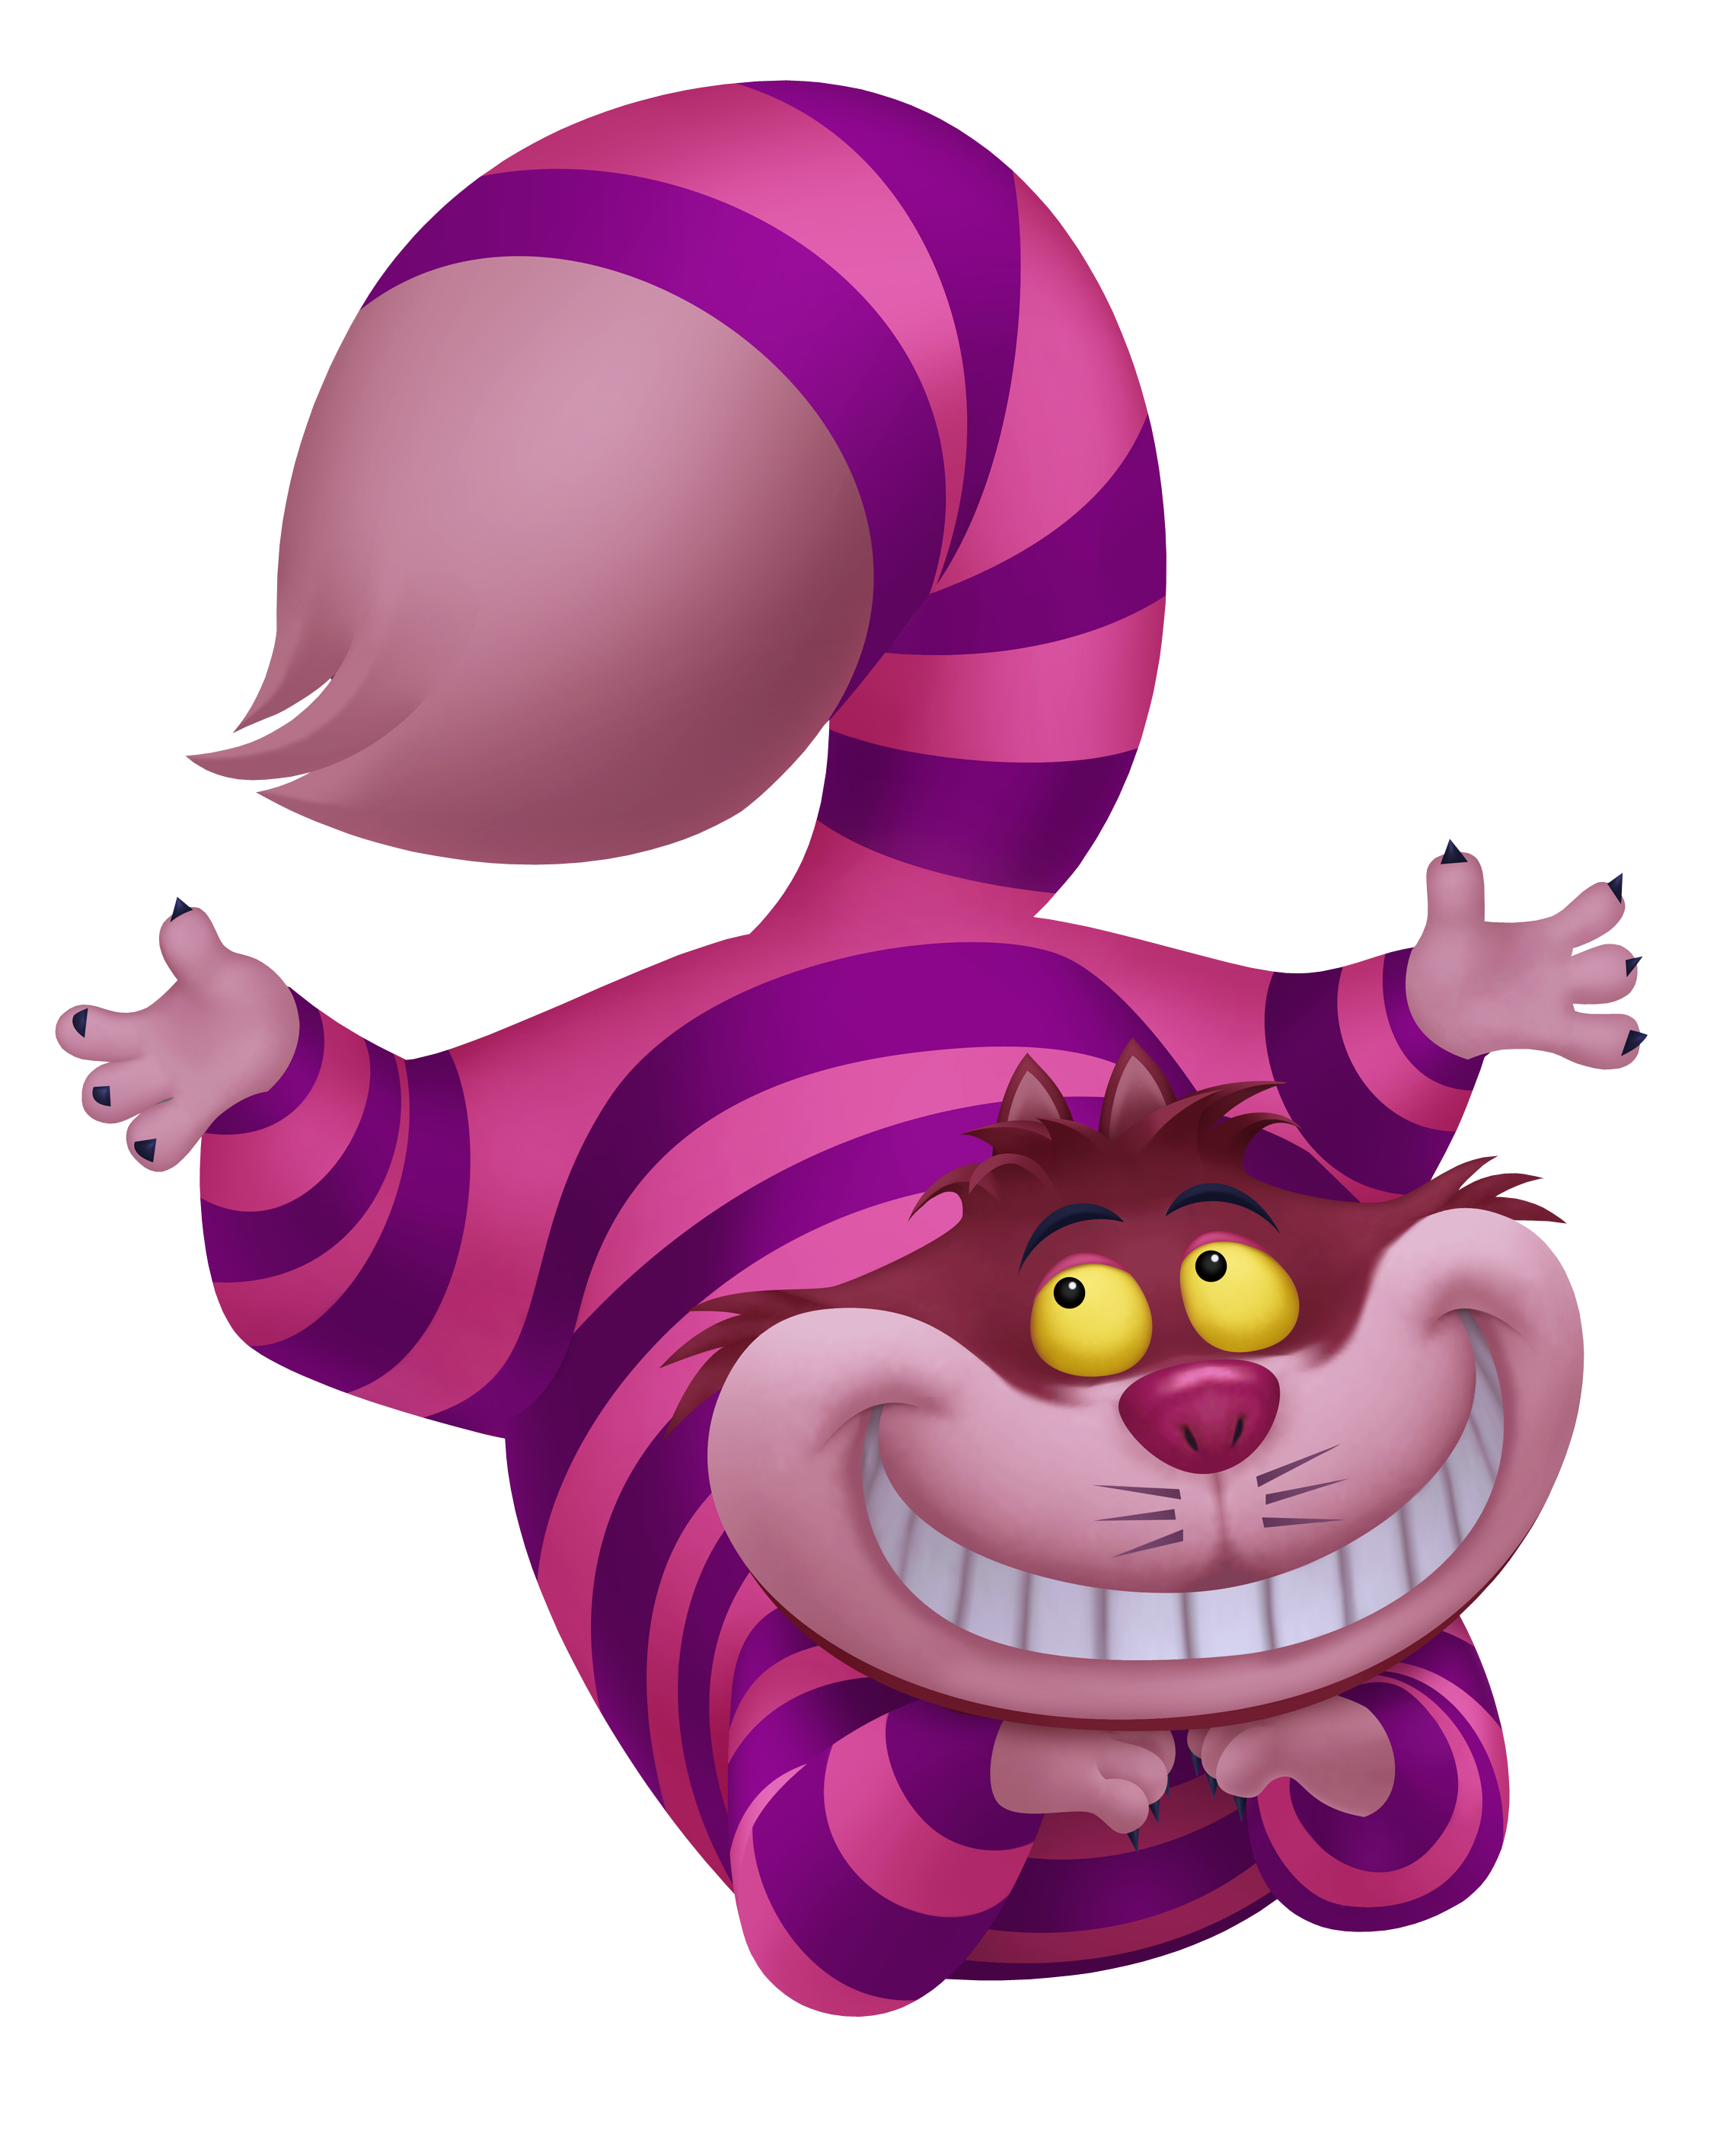 http://images1.wikia.nocookie.net/__cb20110816105658/disney/images/e/e1/Cheshire_Cat_KHREC.png